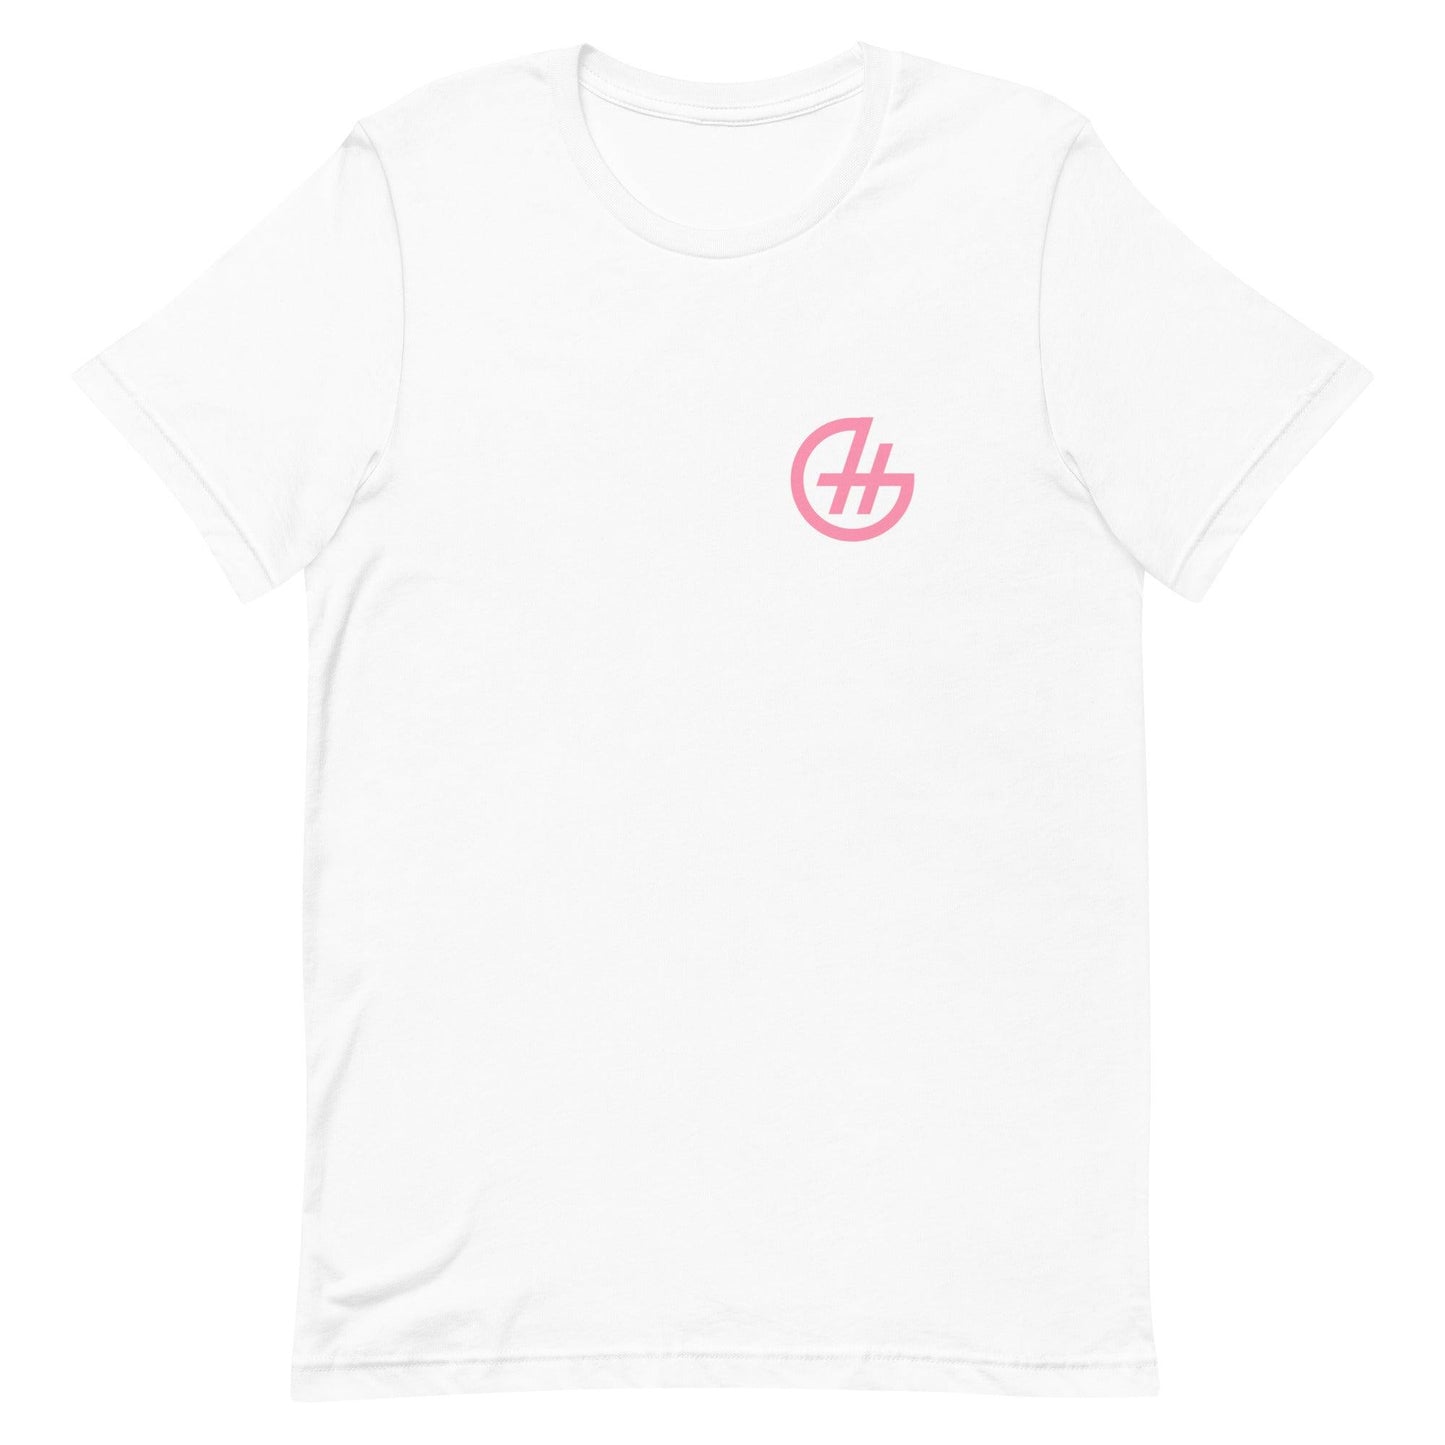 Hannah Gusters "The Brand" t-shirt - Fan Arch